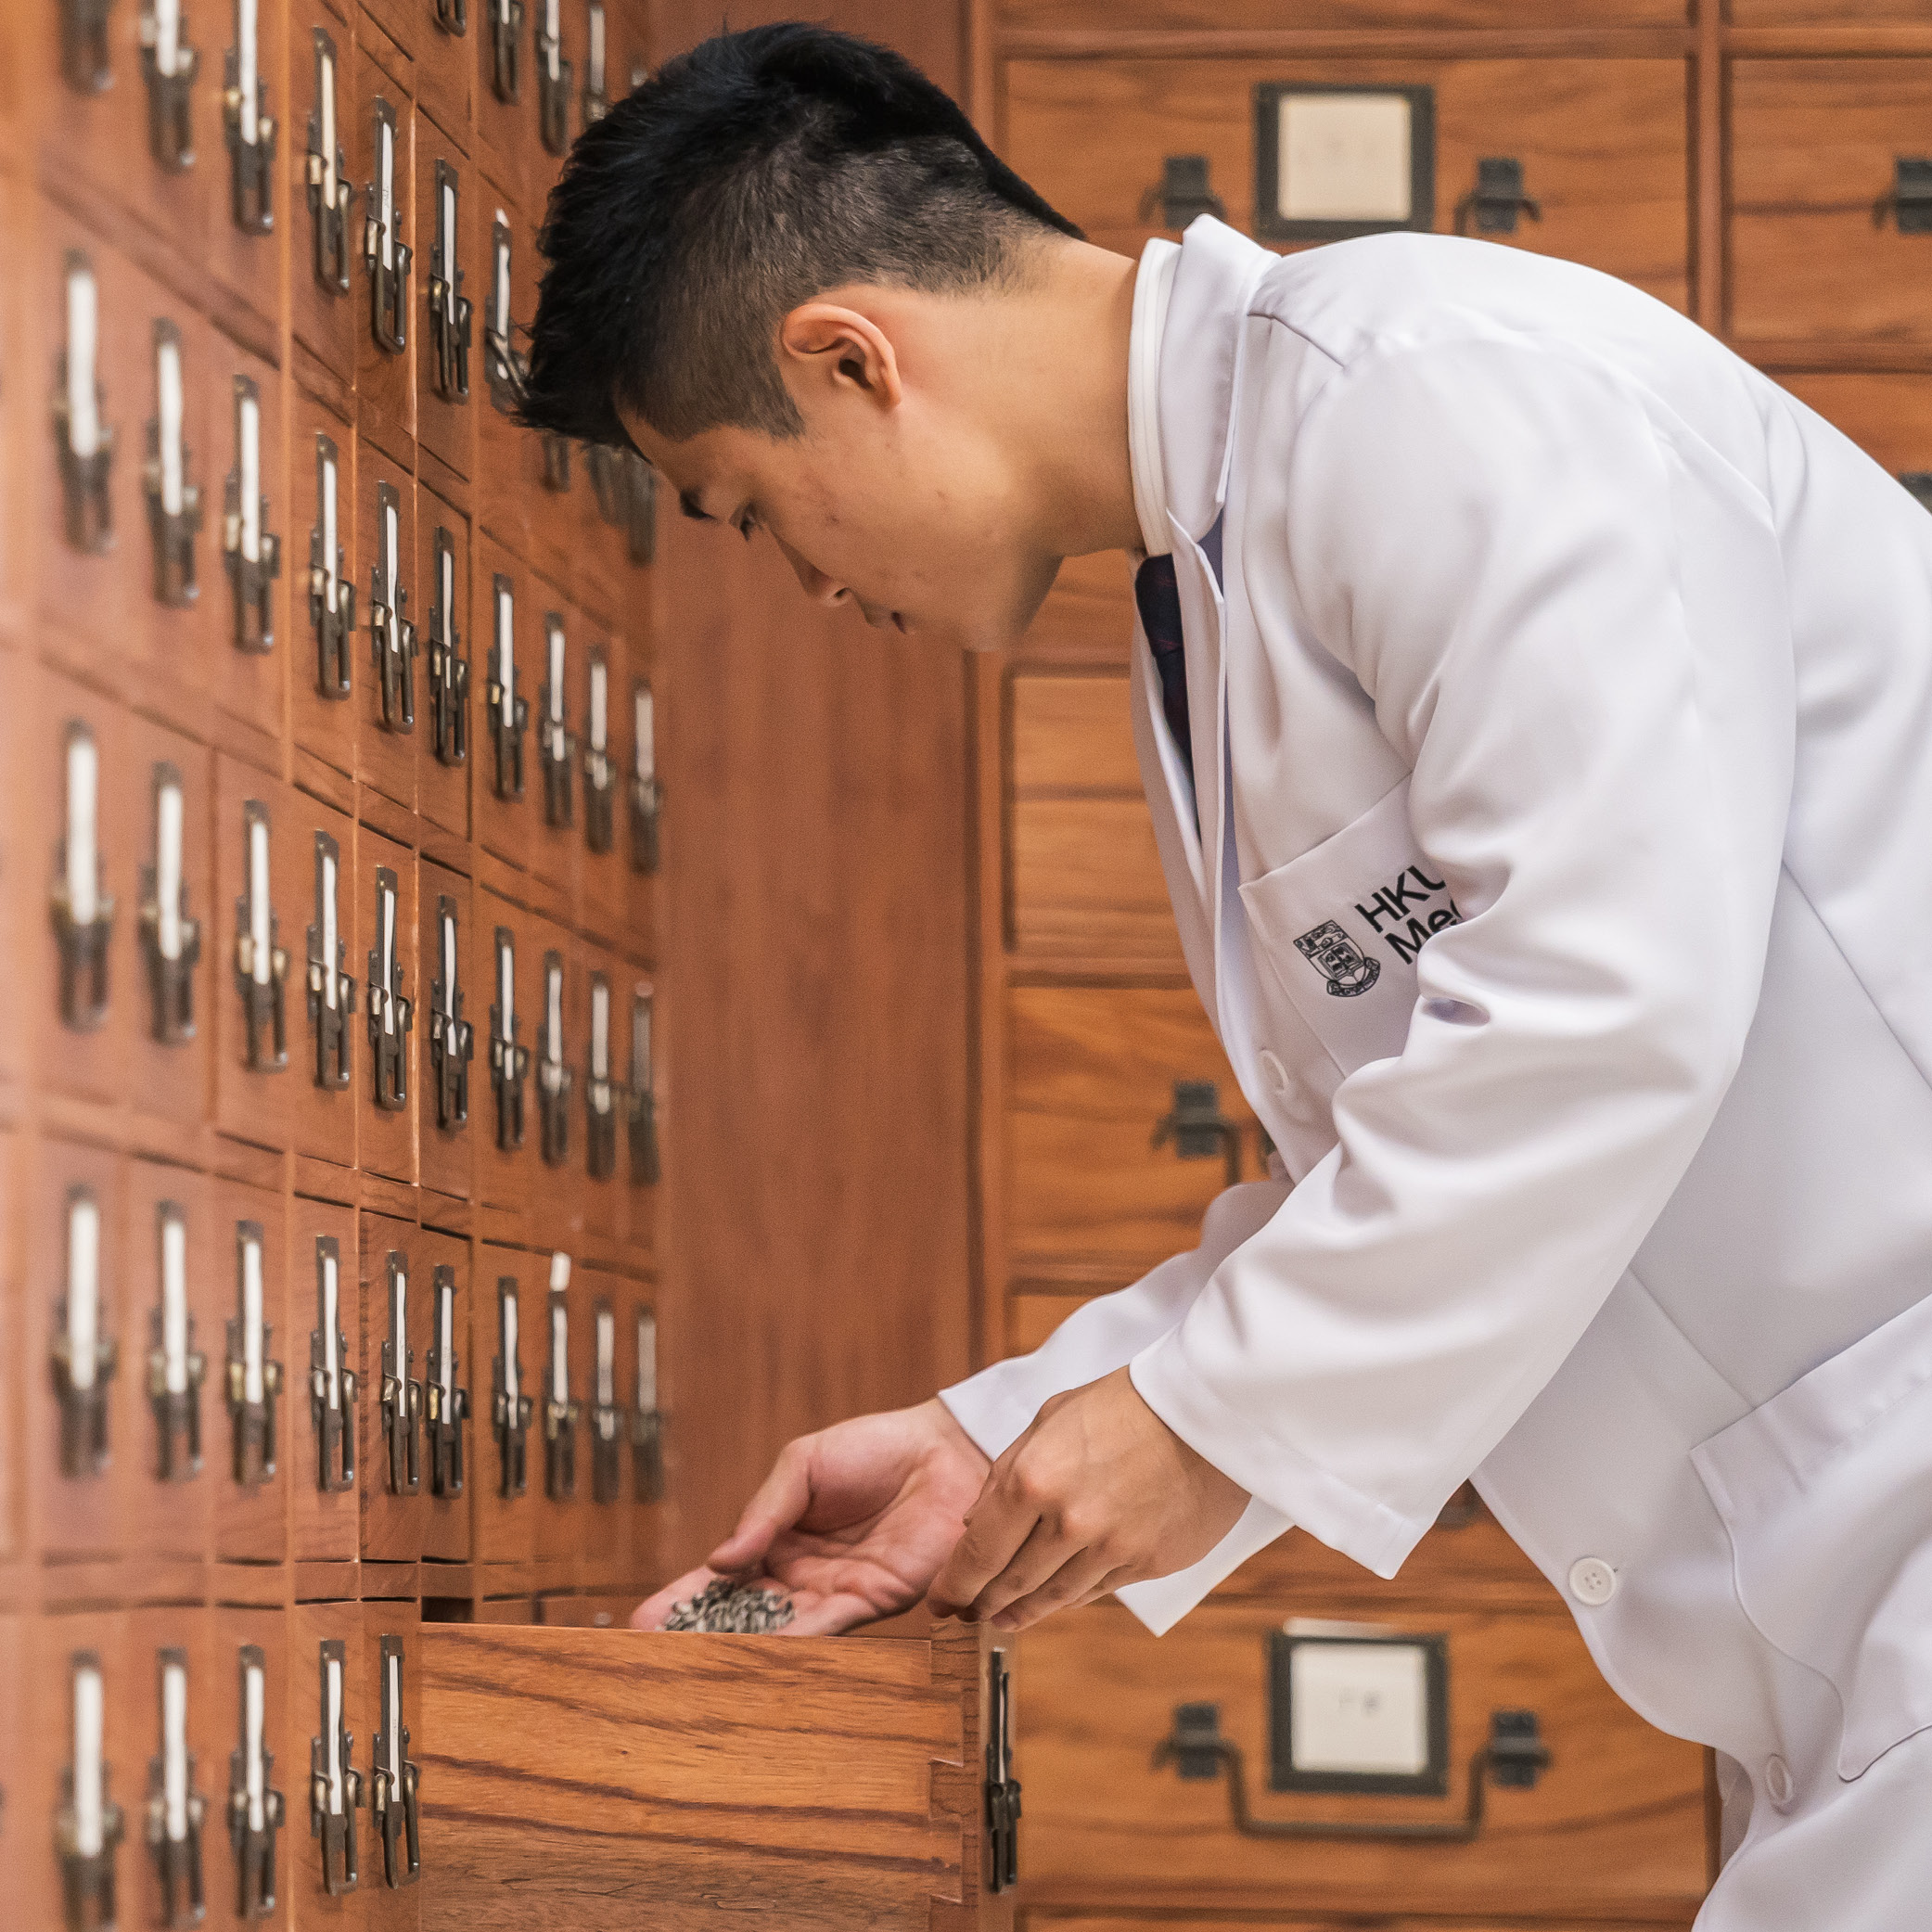 A Chinese medicine student using a traditional Chinese apothecary cabinet.